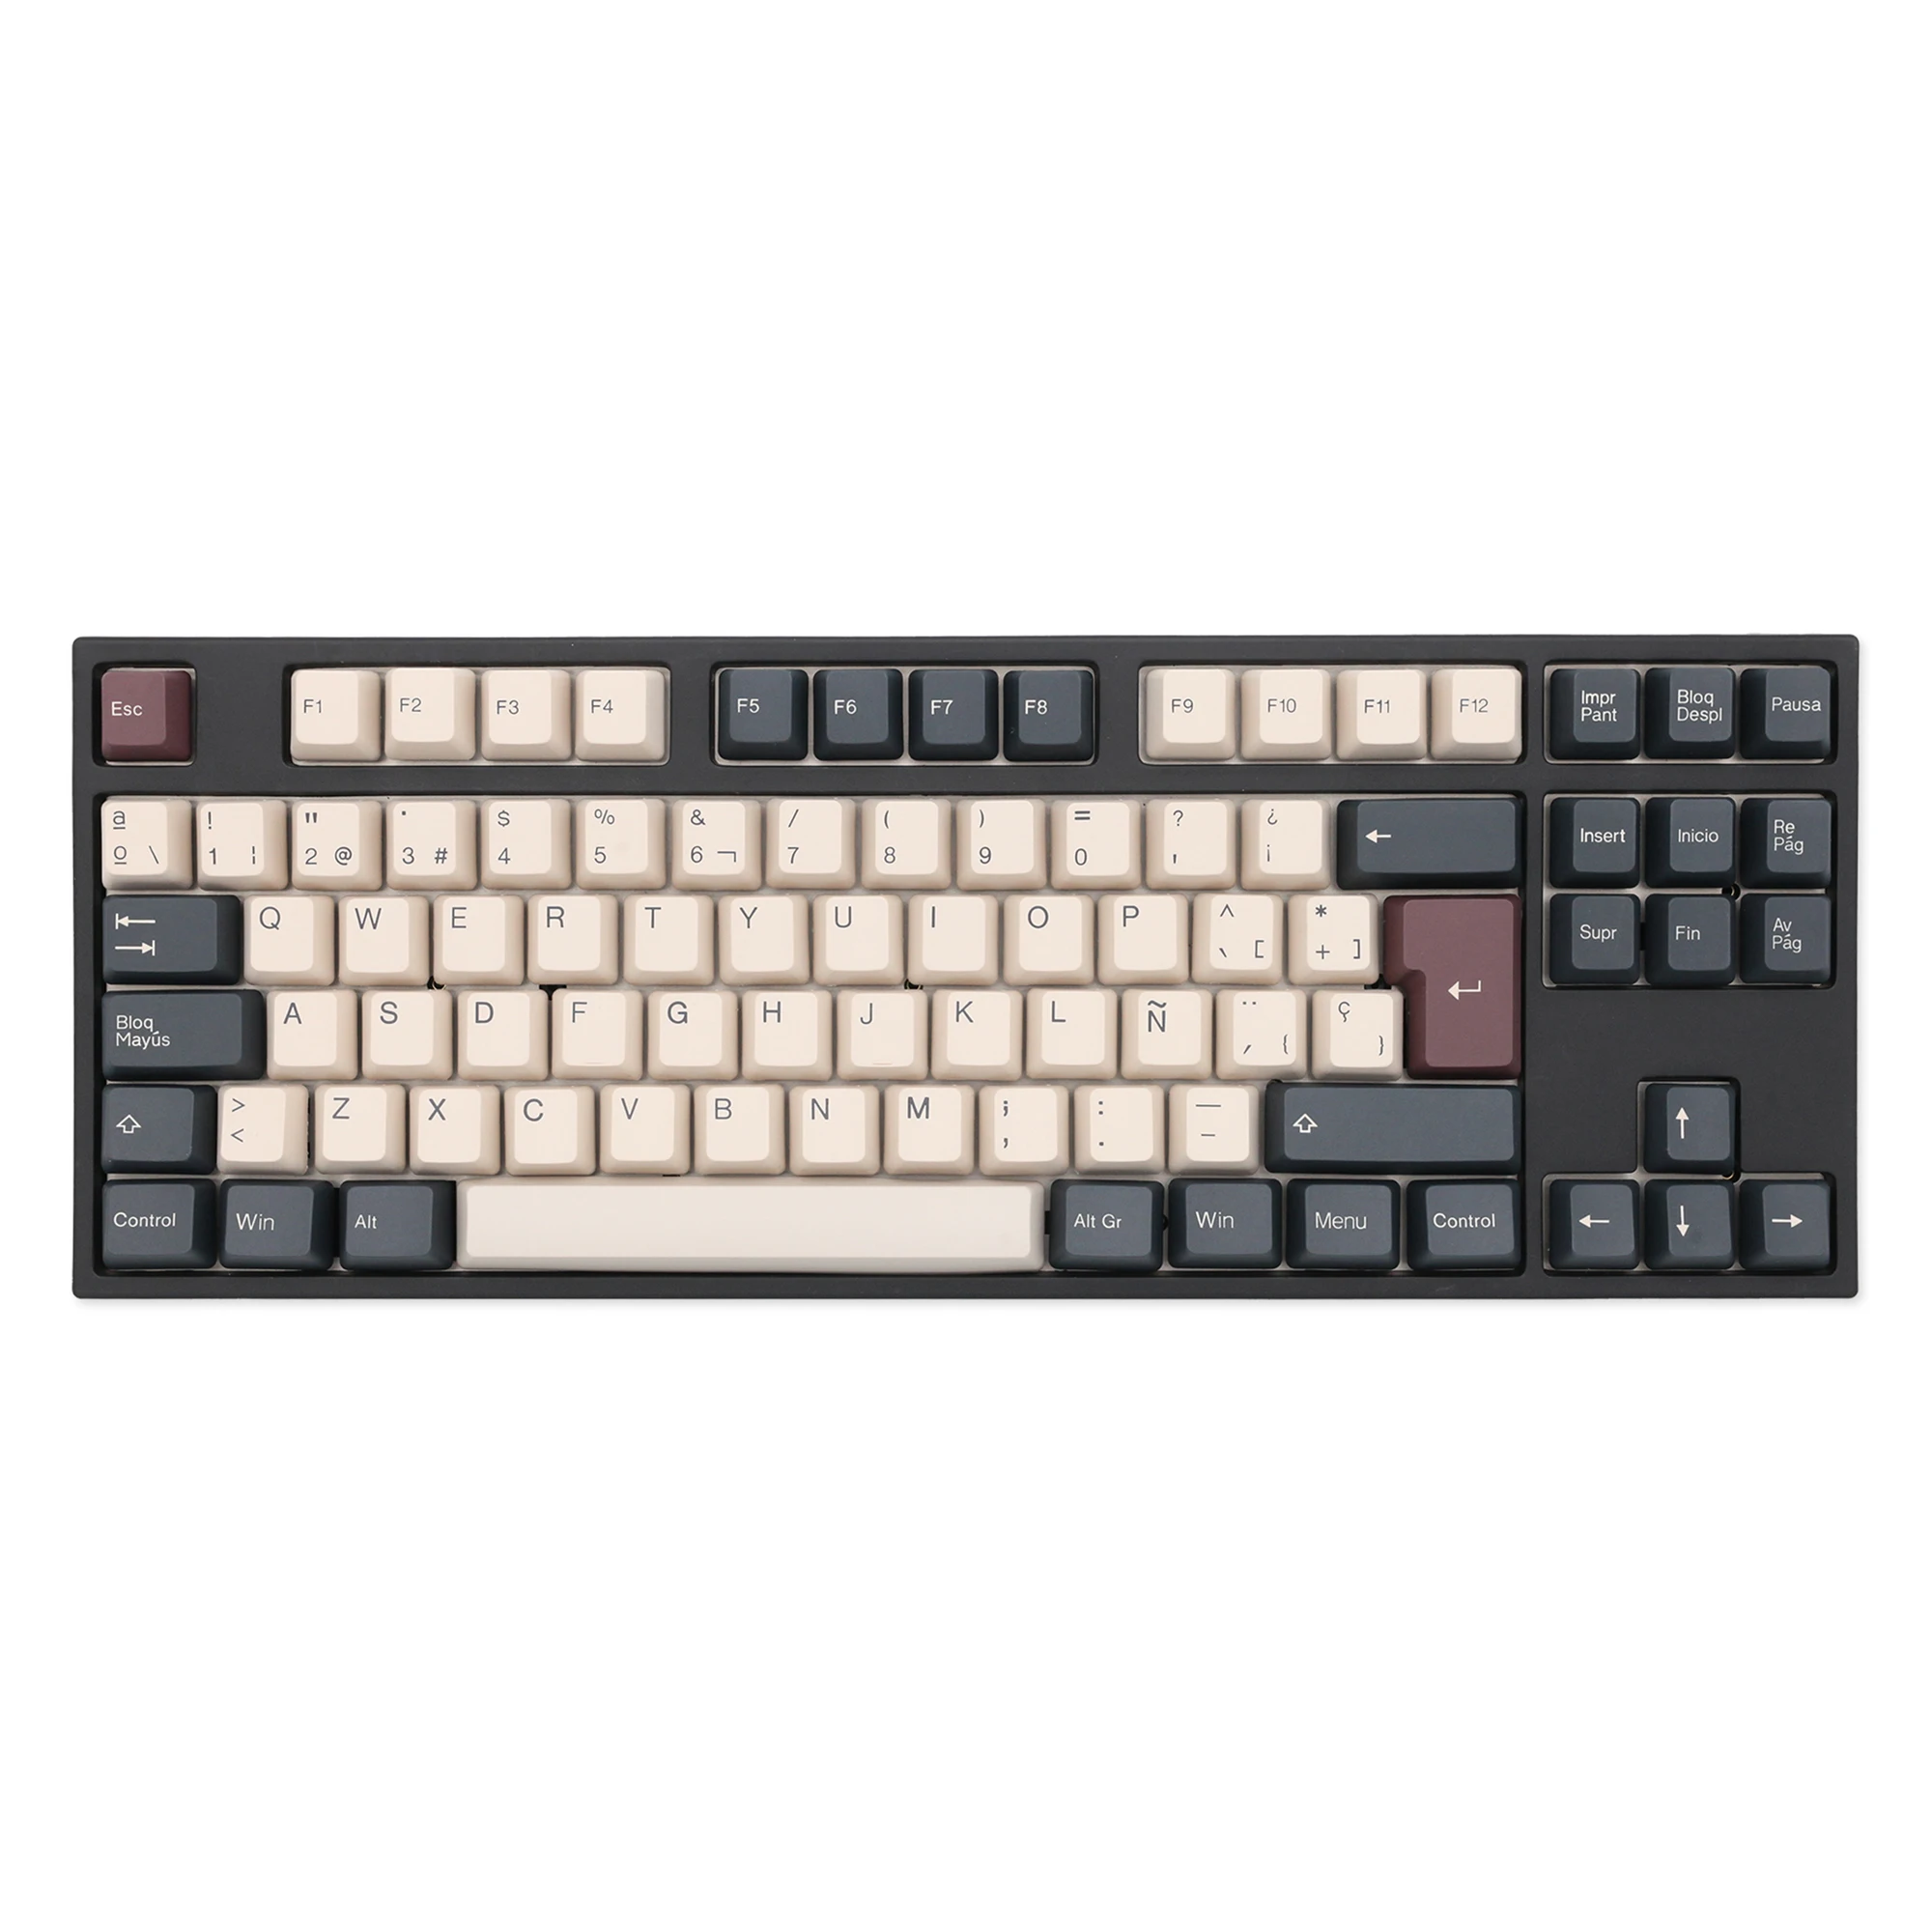 Taihao Cream Dim Grey Keycap ABS double shot keycaps ES Spanish for diy gaming mechanical keyboard - Pudding Keycap